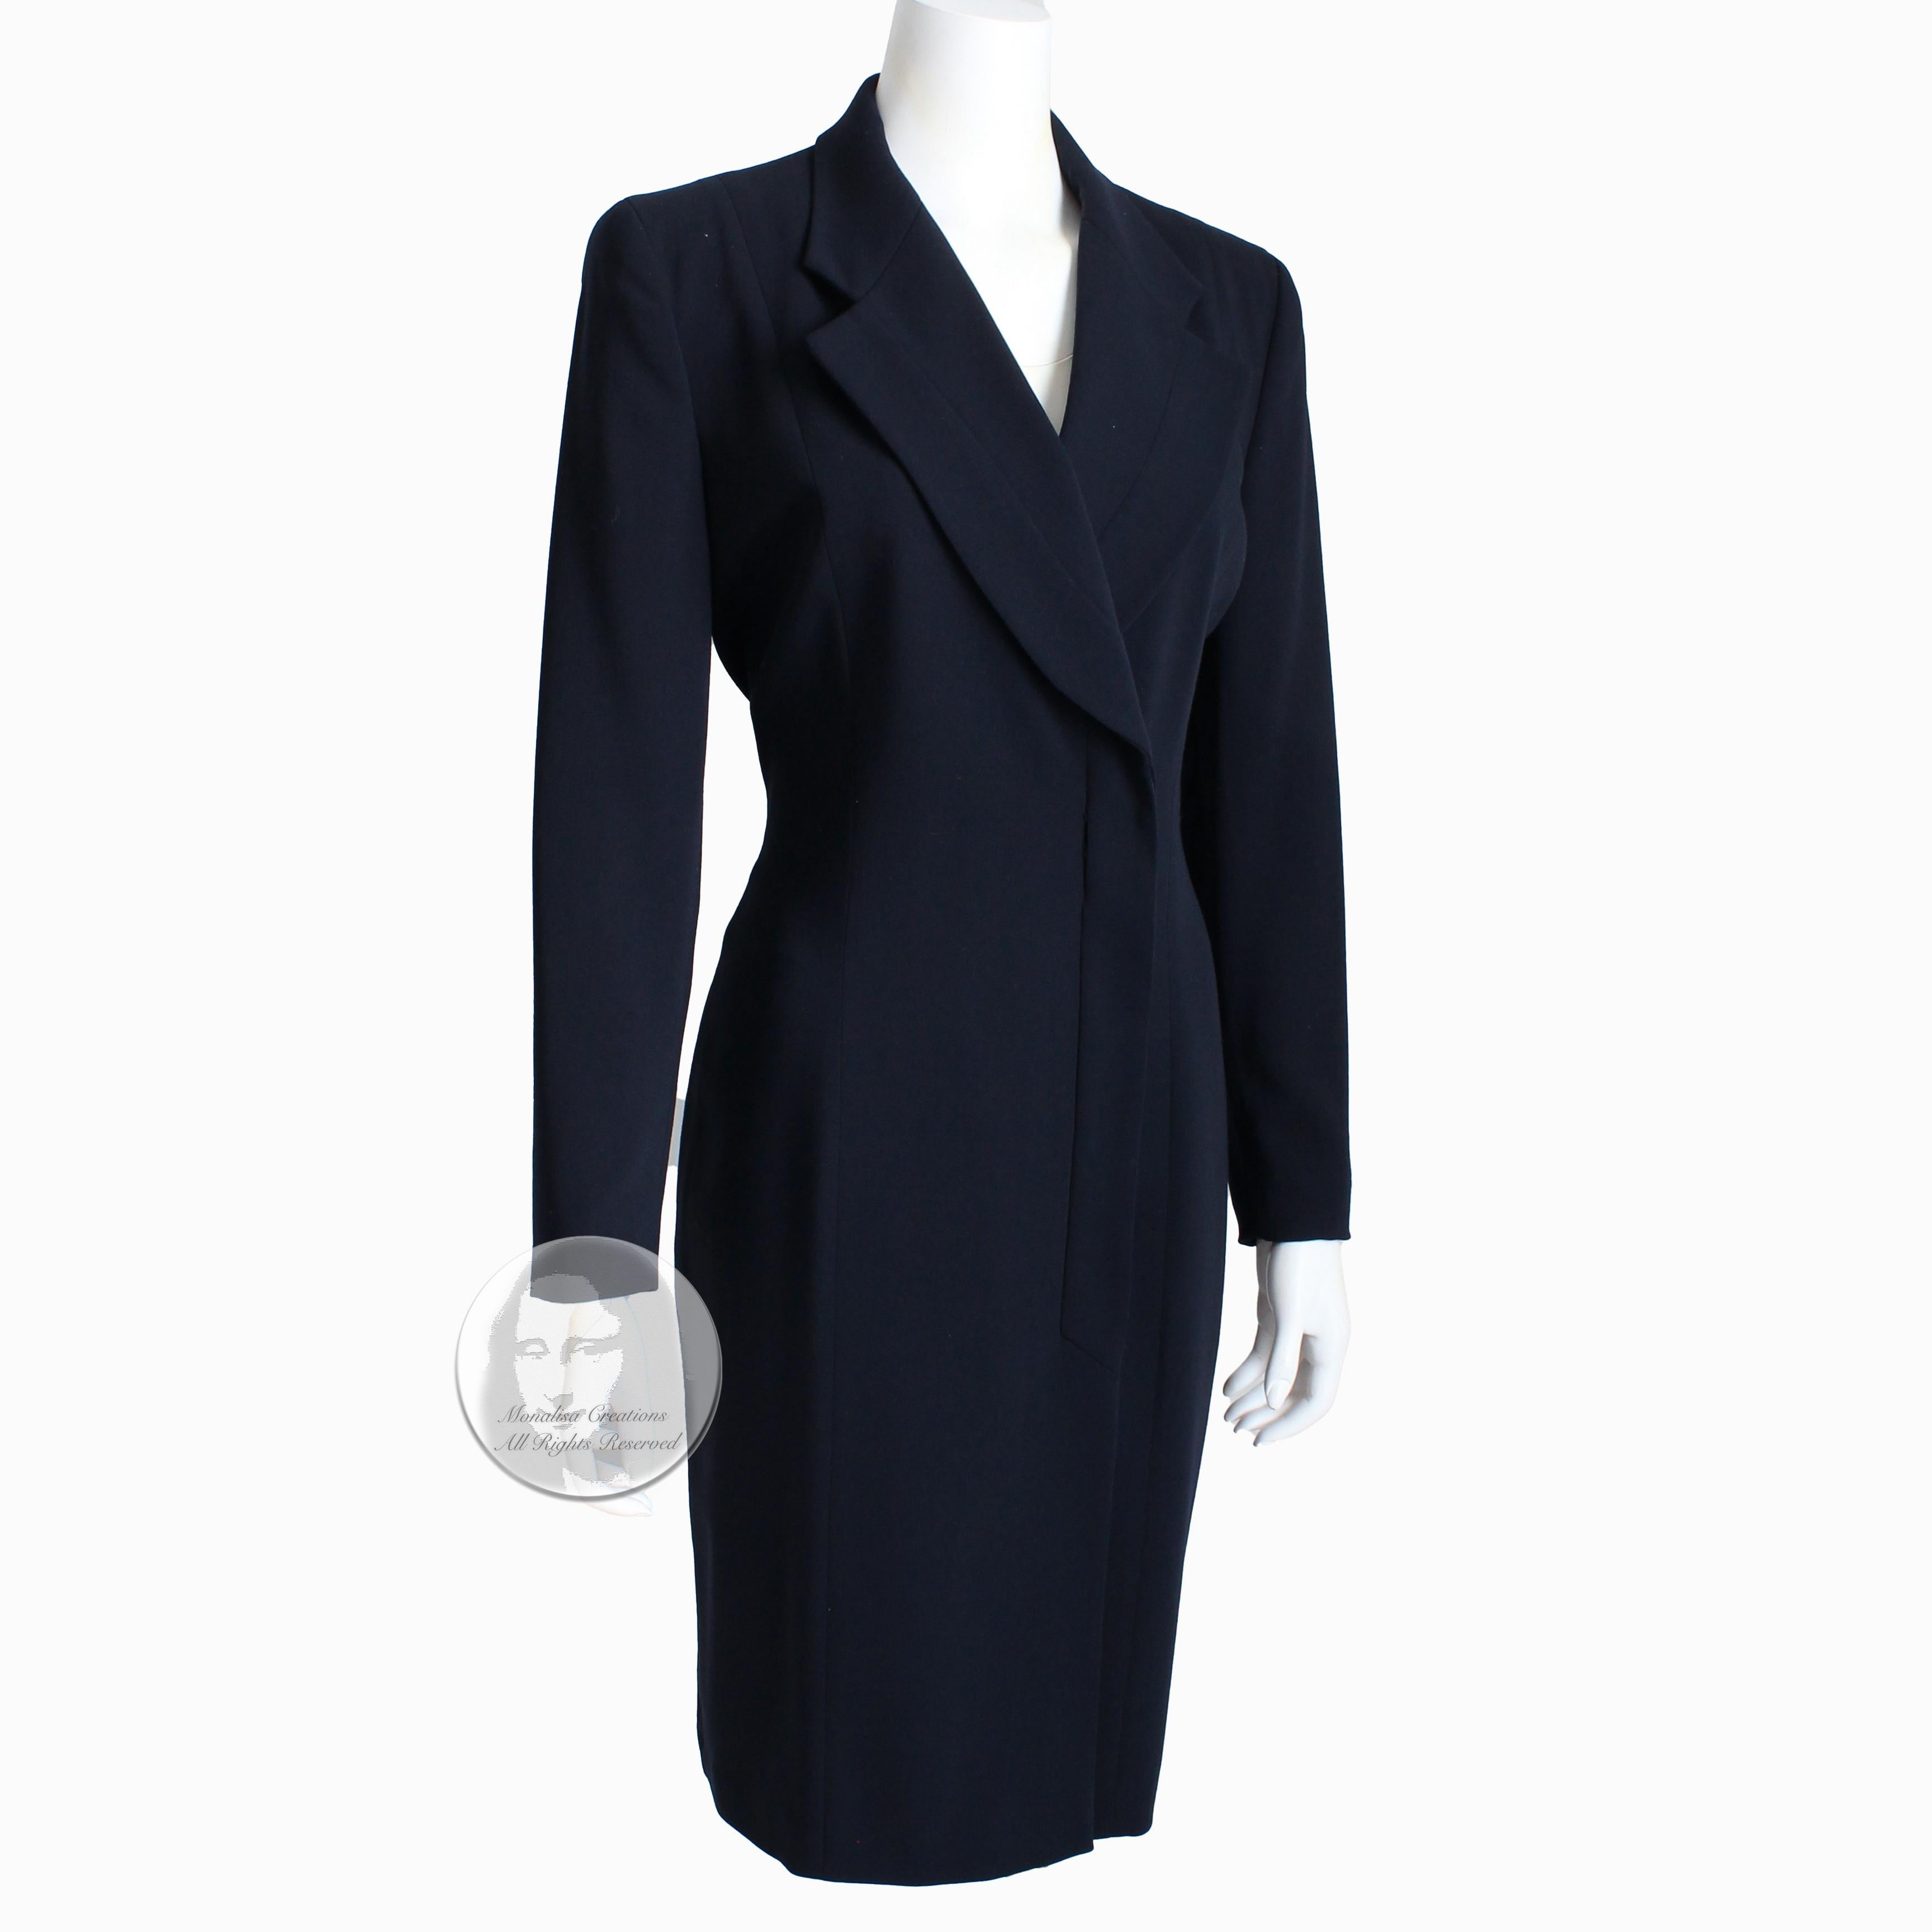 Authentic, preowned, vintage Escada Margaretha Ley dark navy wool coat dress, likely made in the 90s. Made from a dark navy new wool gabardine fabric, it's lined in satin and fastens with hidden buttons.   

Perfect for work - or for any time you're